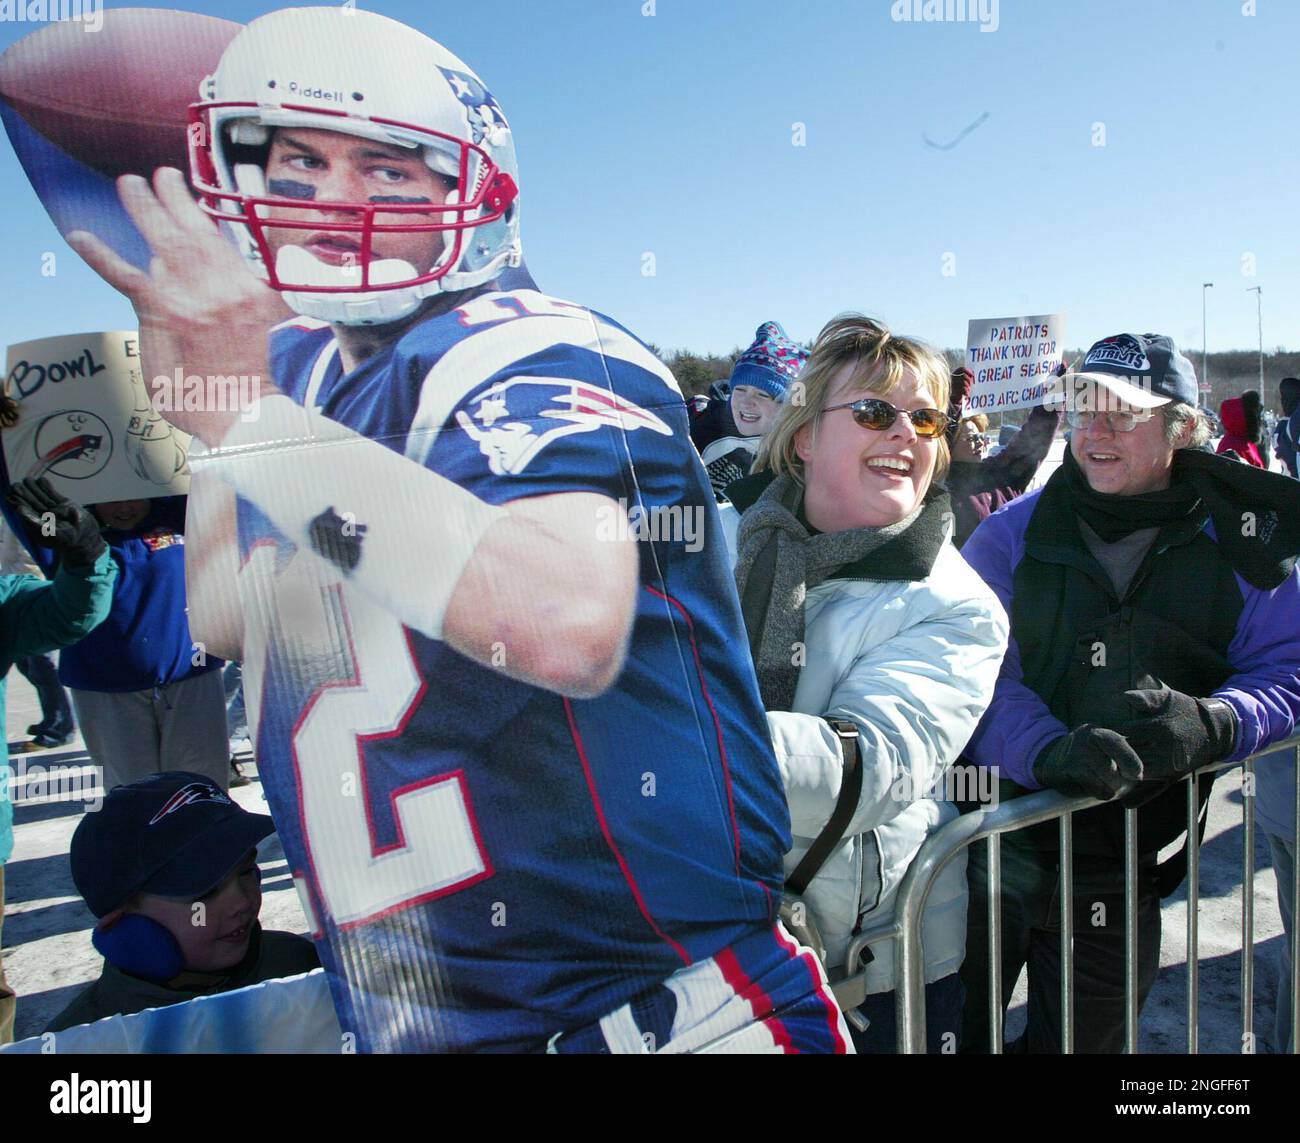 New England Patriots fan Kristen Liddell of Milton, Mass. holds cardboard image of quarterback Tom Brady during a pep rally for the Super Bowl bond Patriots at Gillette Stadium in Foxboro, Mass., Sunday, Jan. 25 2004, en route to Houston, Texas. The Patriots will face the North Carolina Panthers in Super Bowl XXXVIII on Feb. 1. (AP Photo/Jim Rogash) Stock Photo